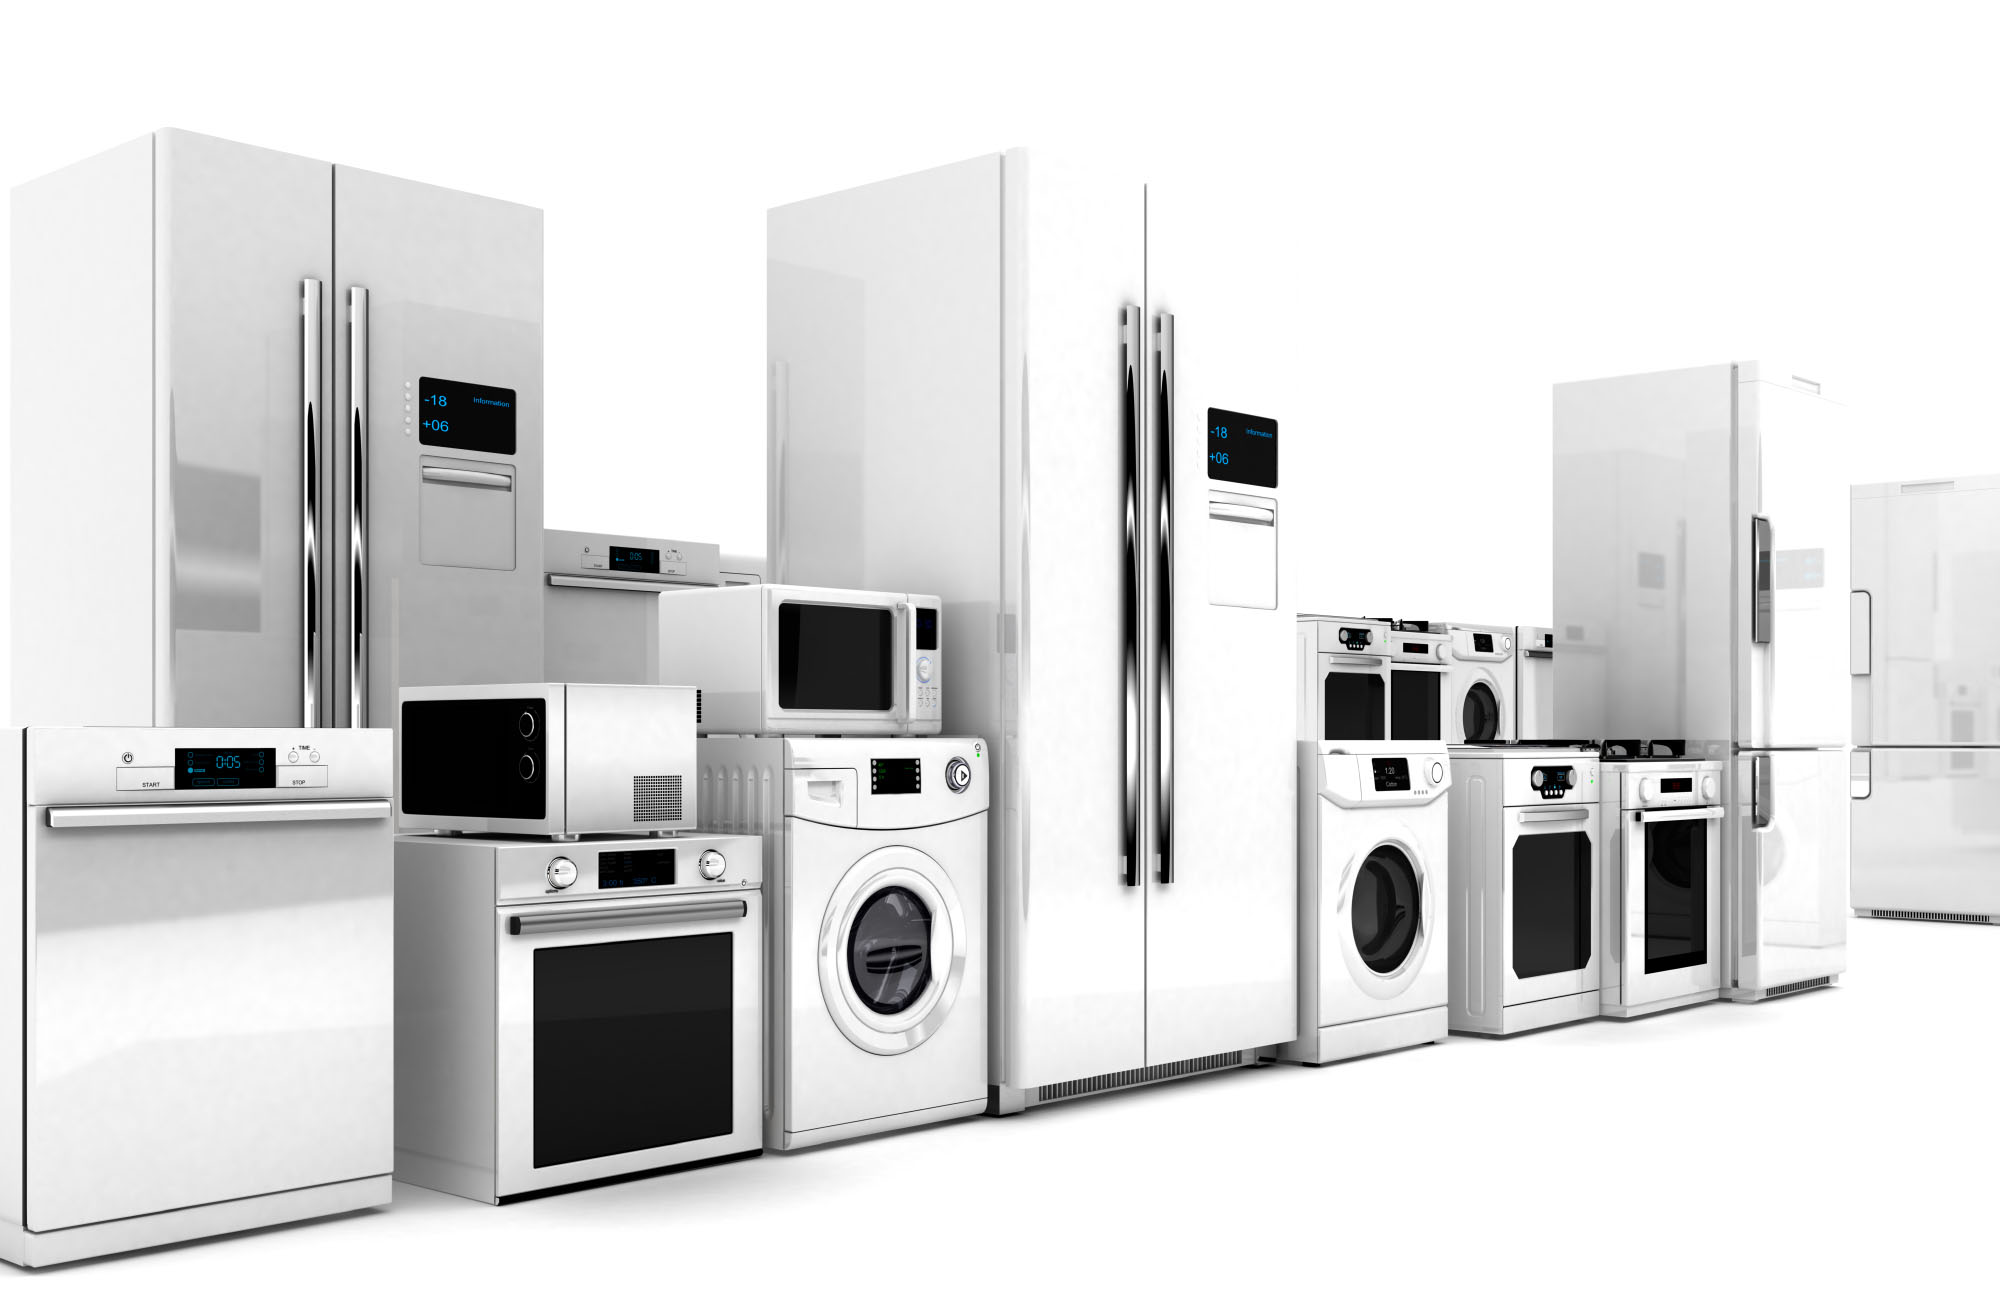 Automated production of household appliances – white goods